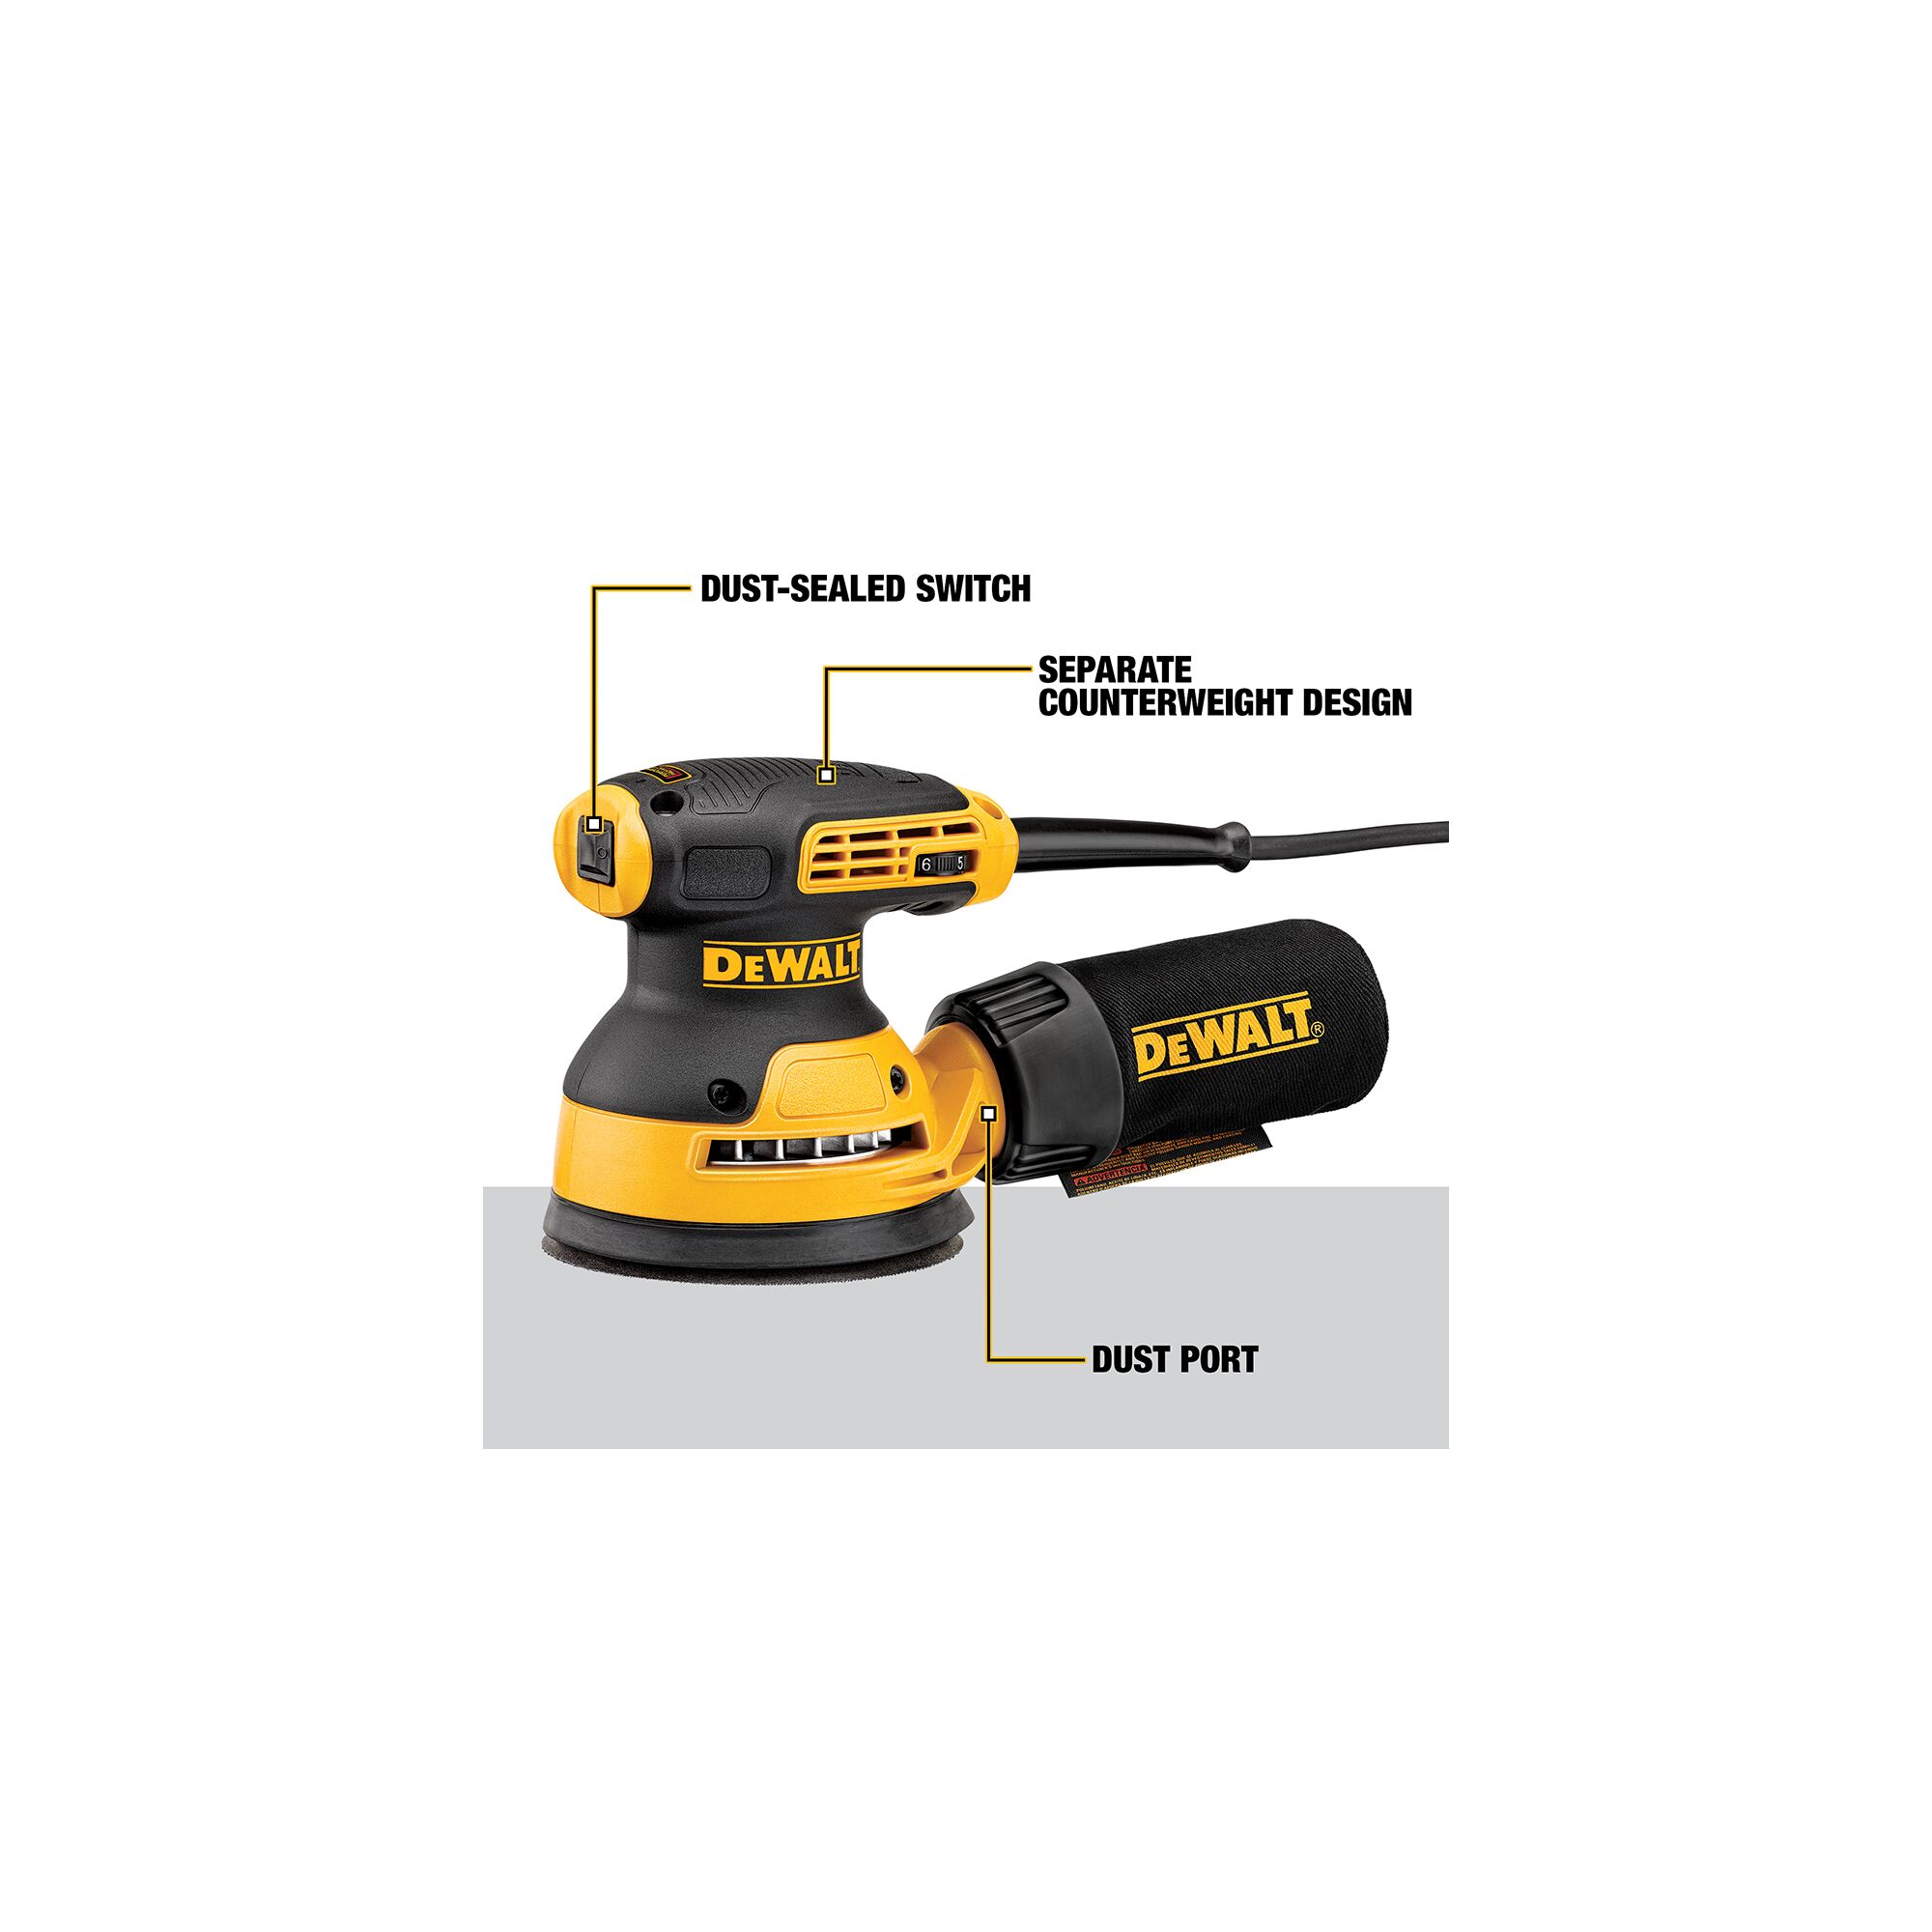 DEWALT 3-Amp Corded Sander with Dust Management in the Power Sanders department at